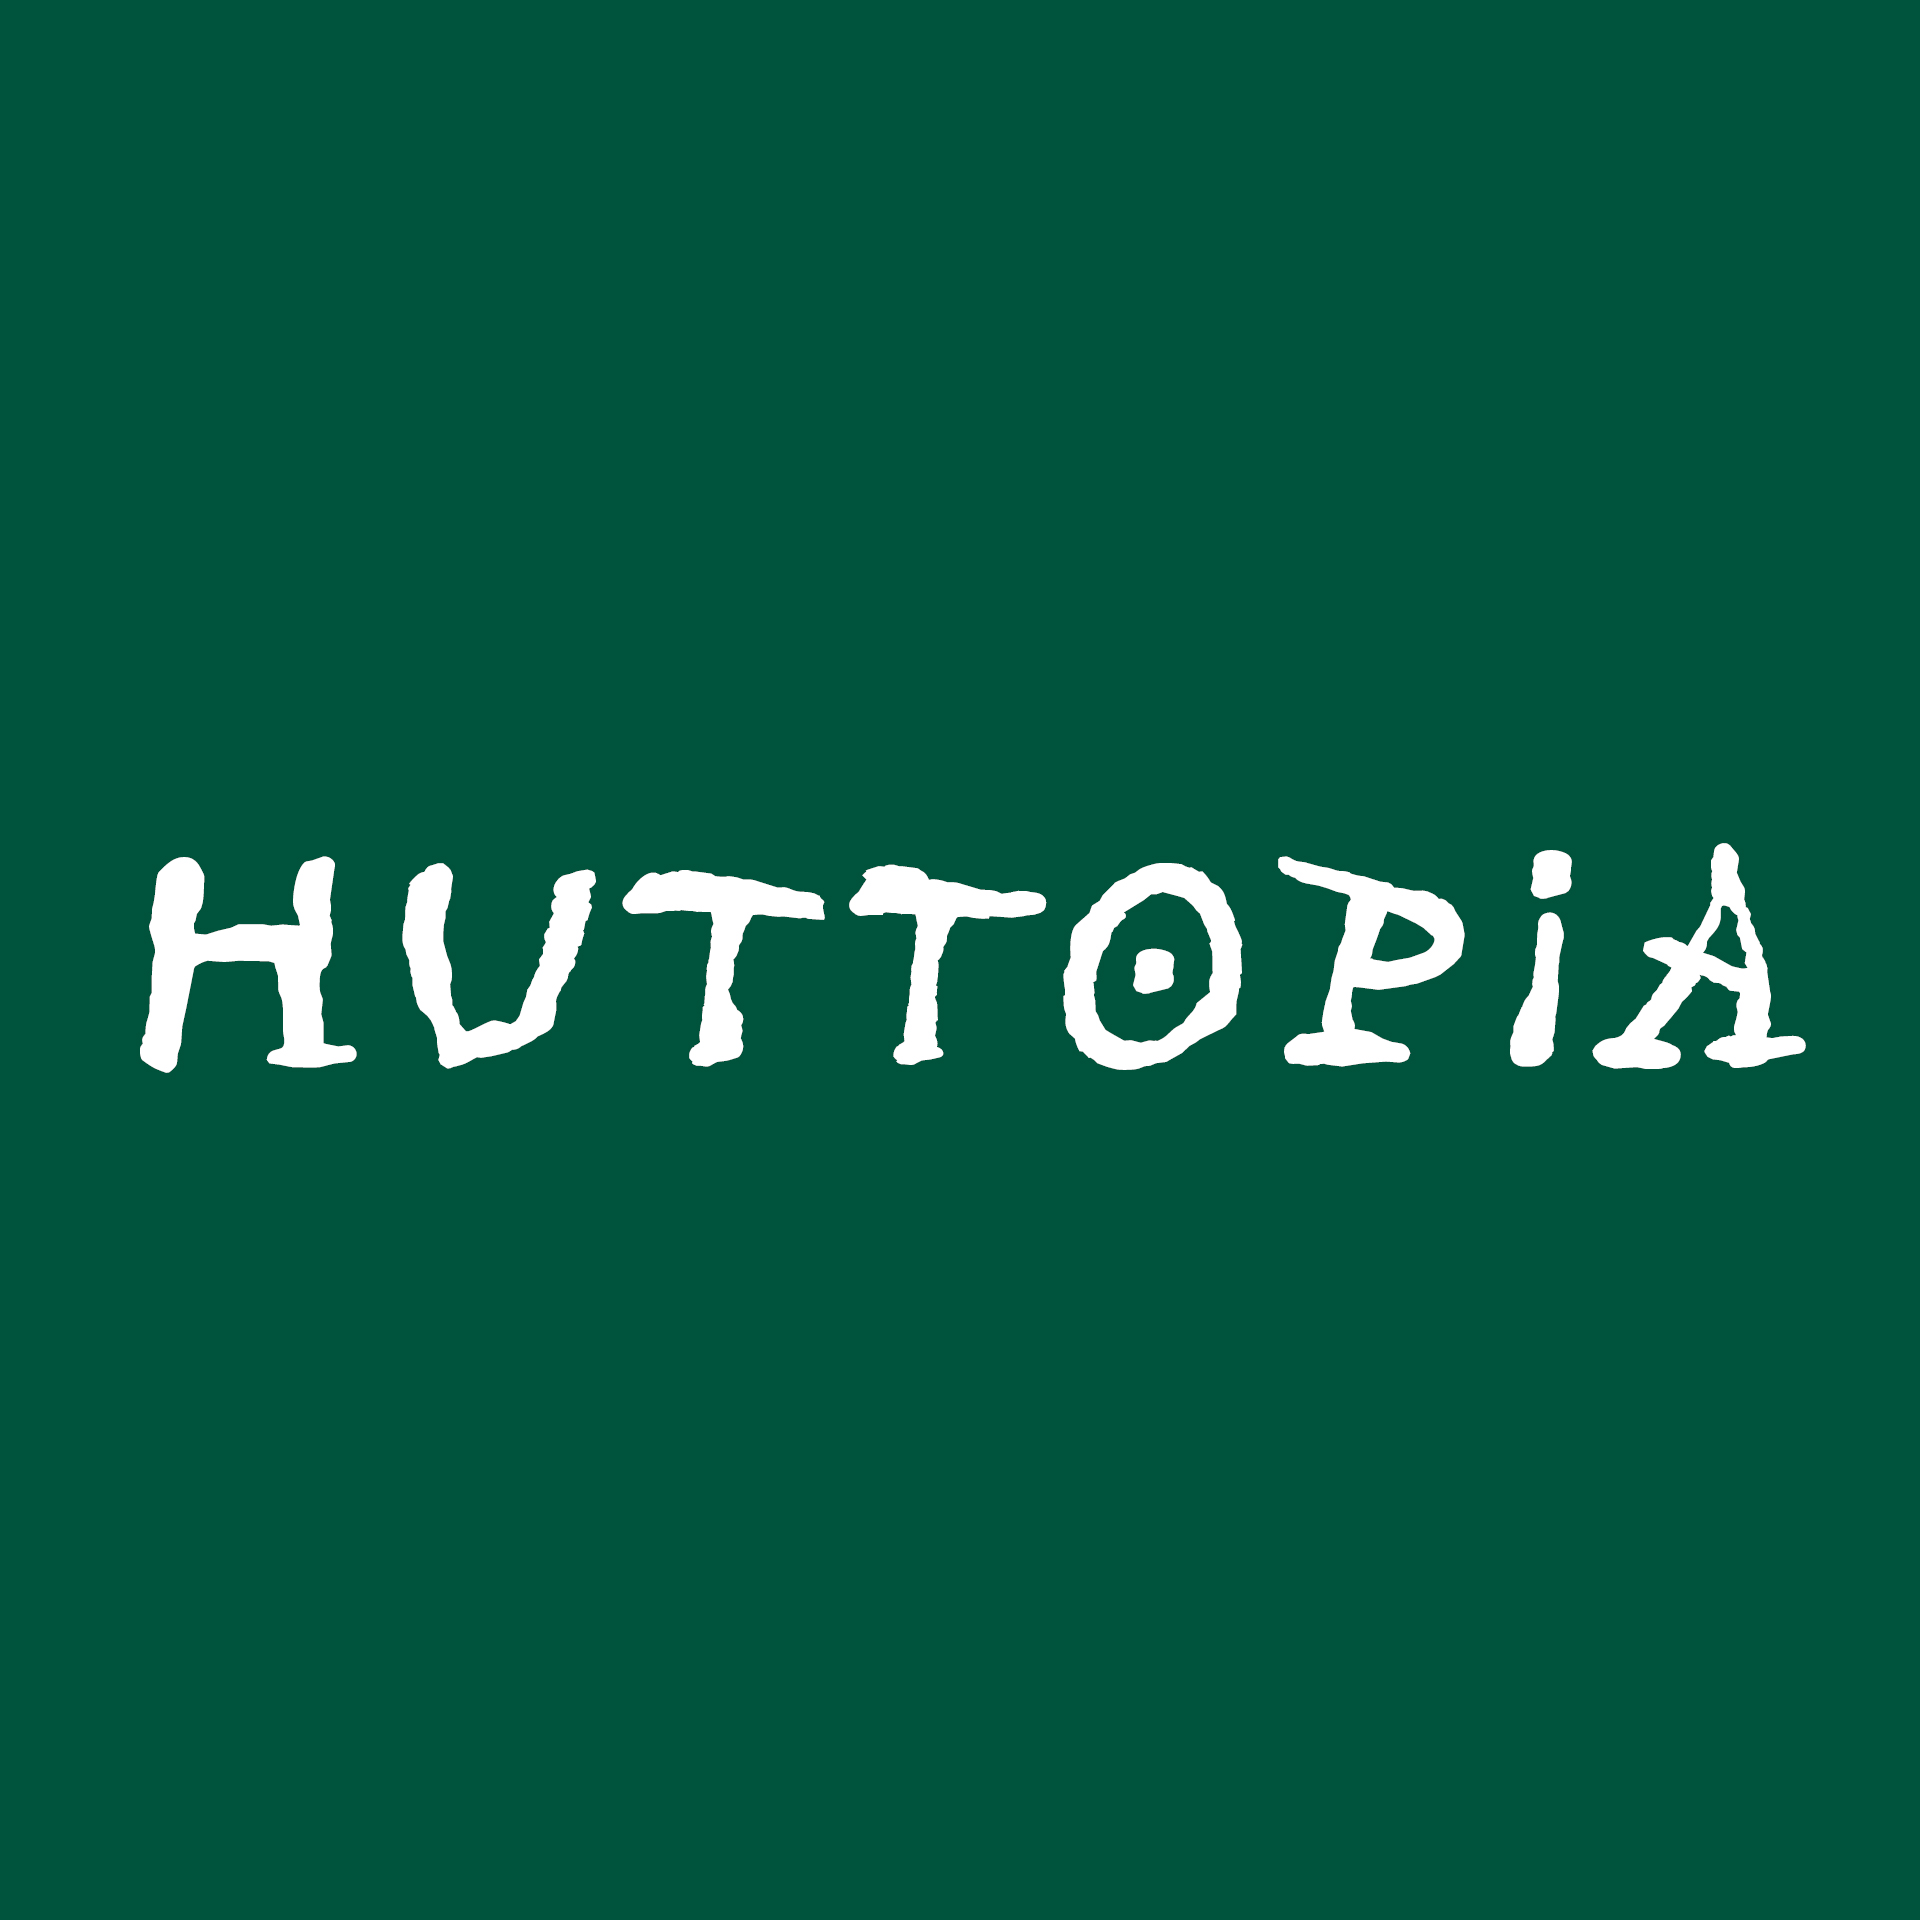 See the Huttopia: a pioneer in sustainable tourism success story